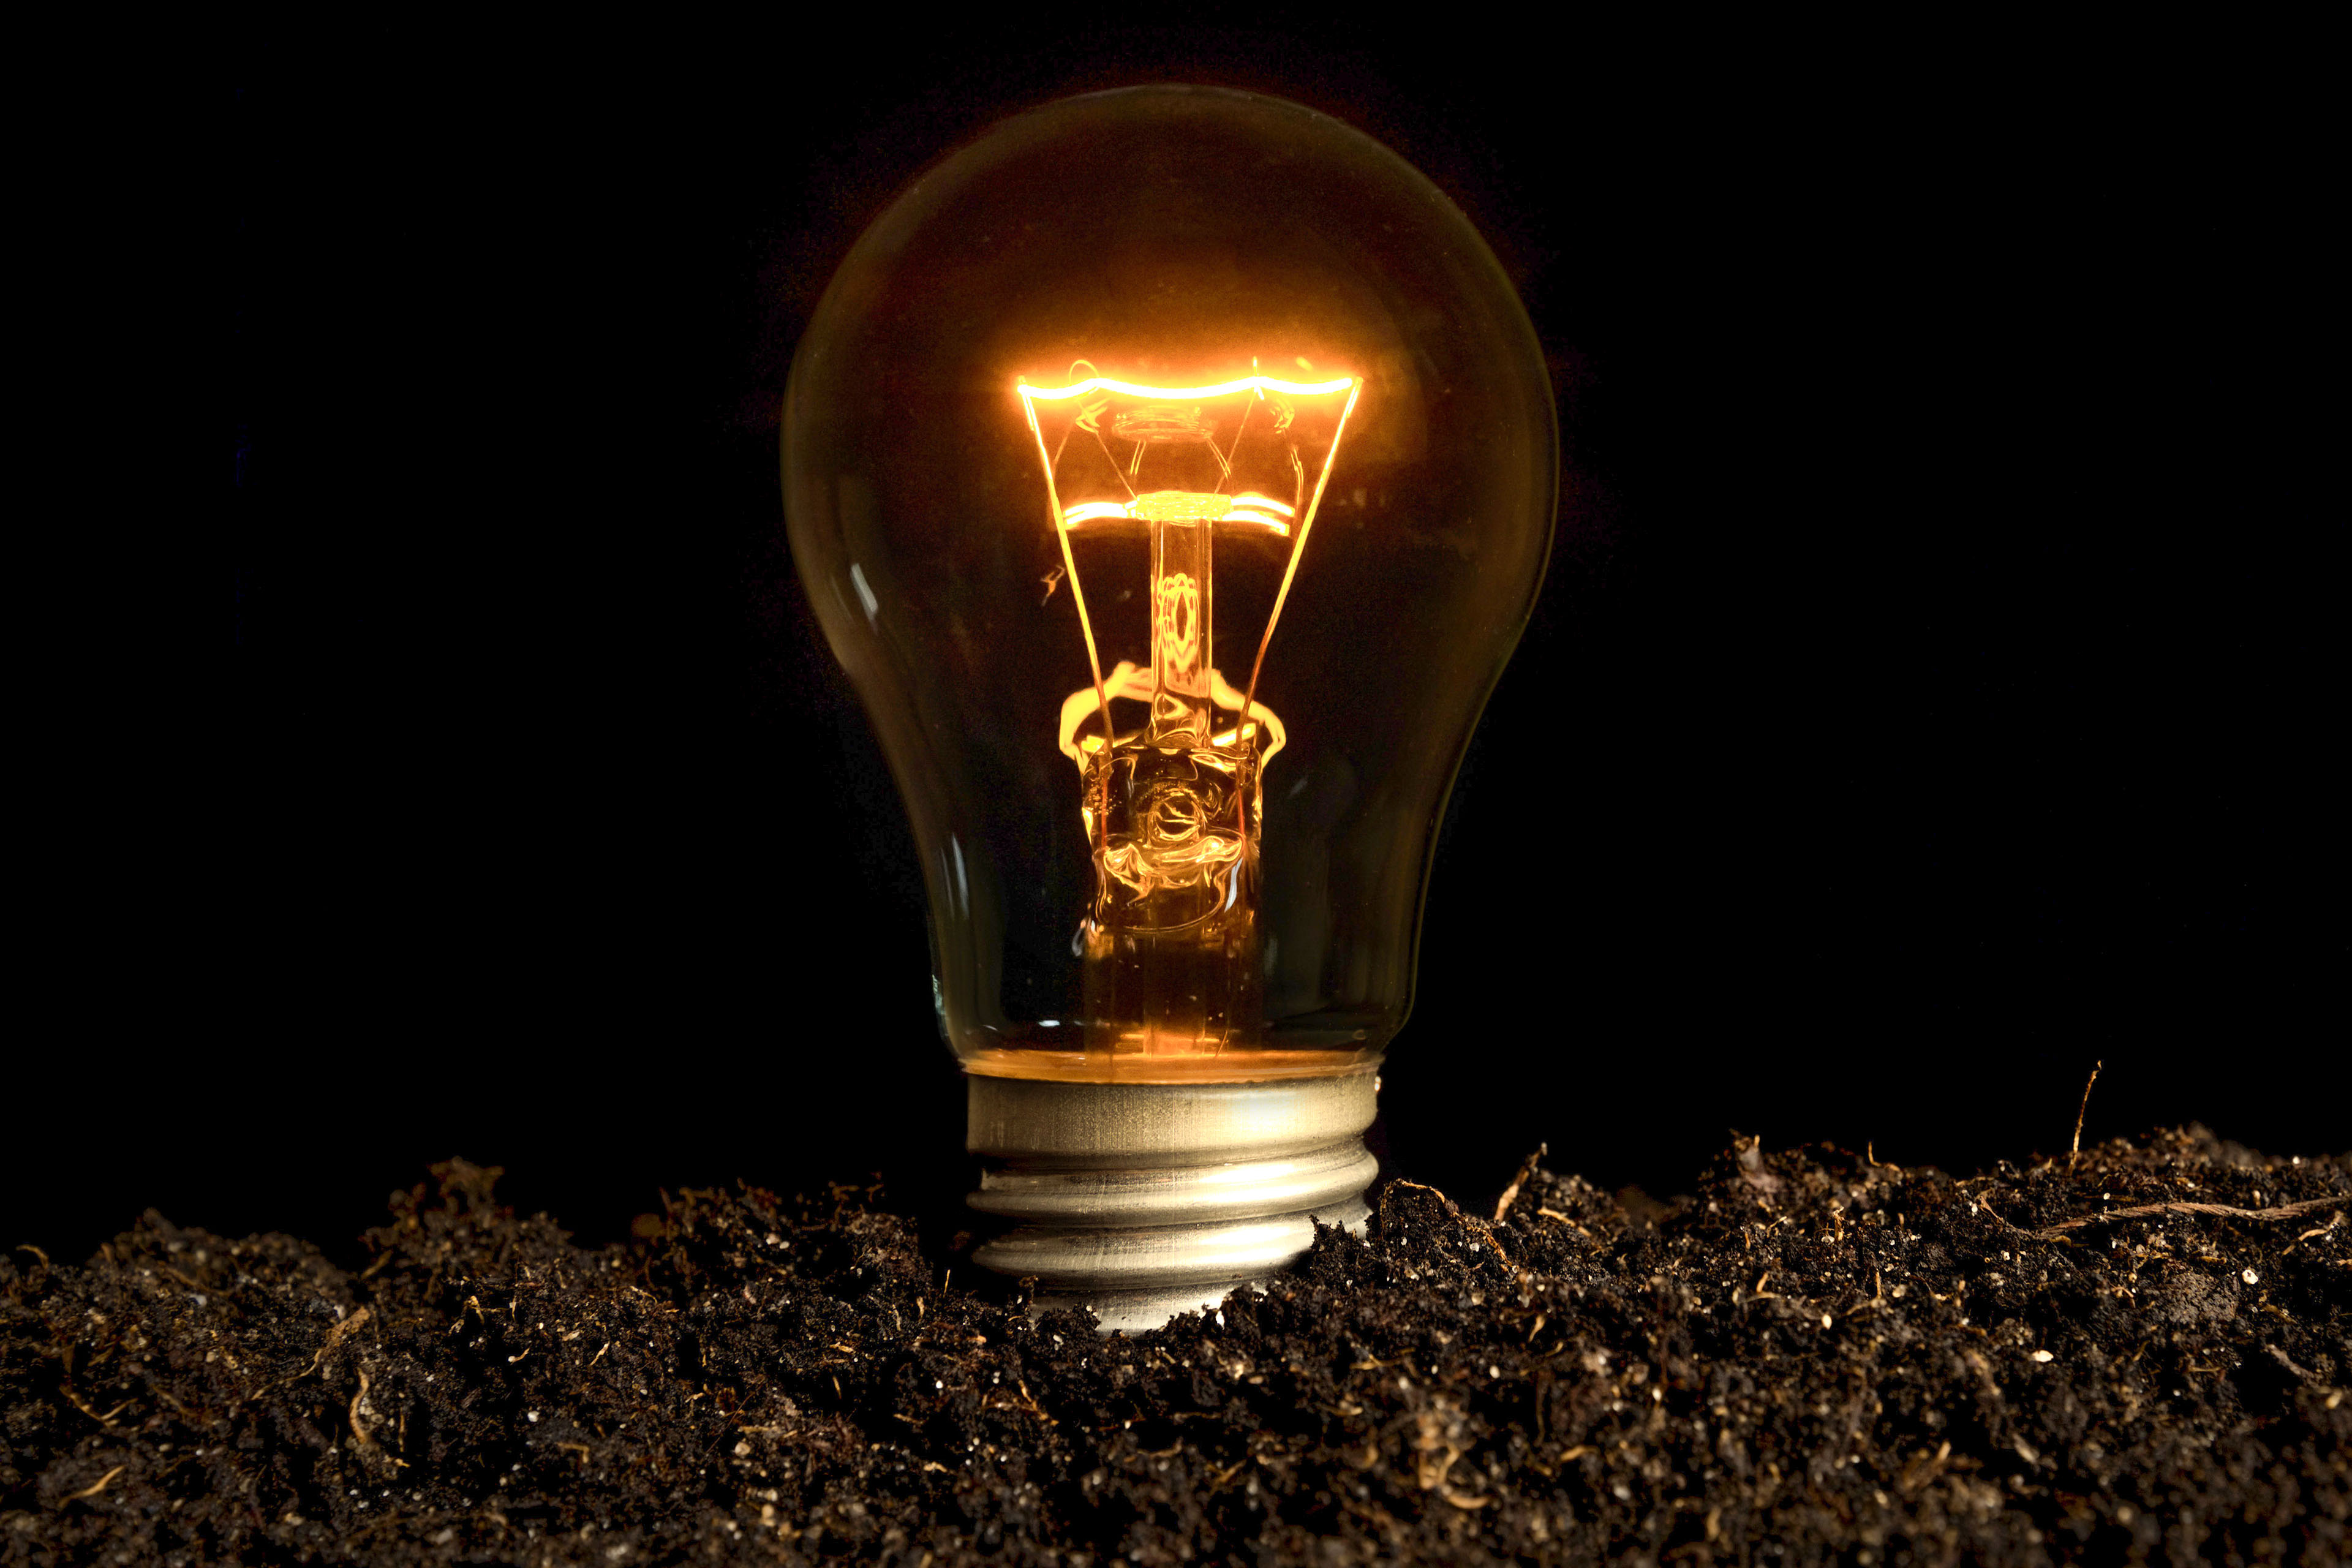 Image of a light bulb planted in the ground